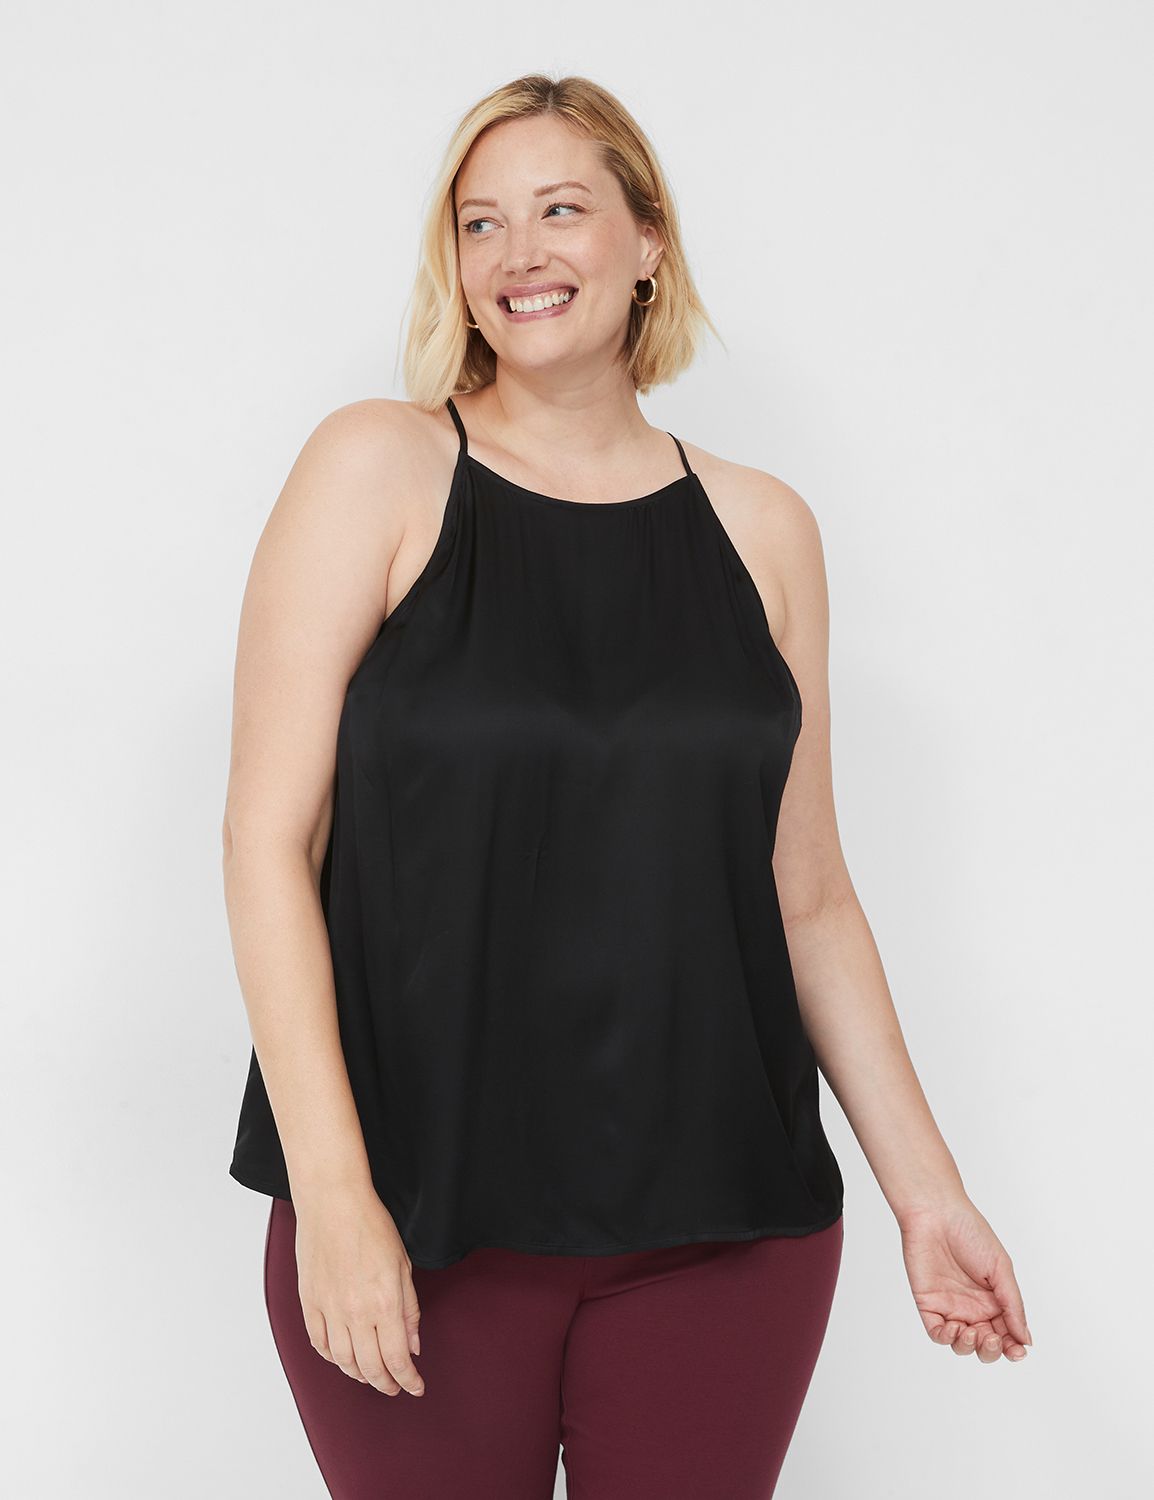 Levmjia Plus Size Womens Tank Tops Clearance Women's Camisole Tops